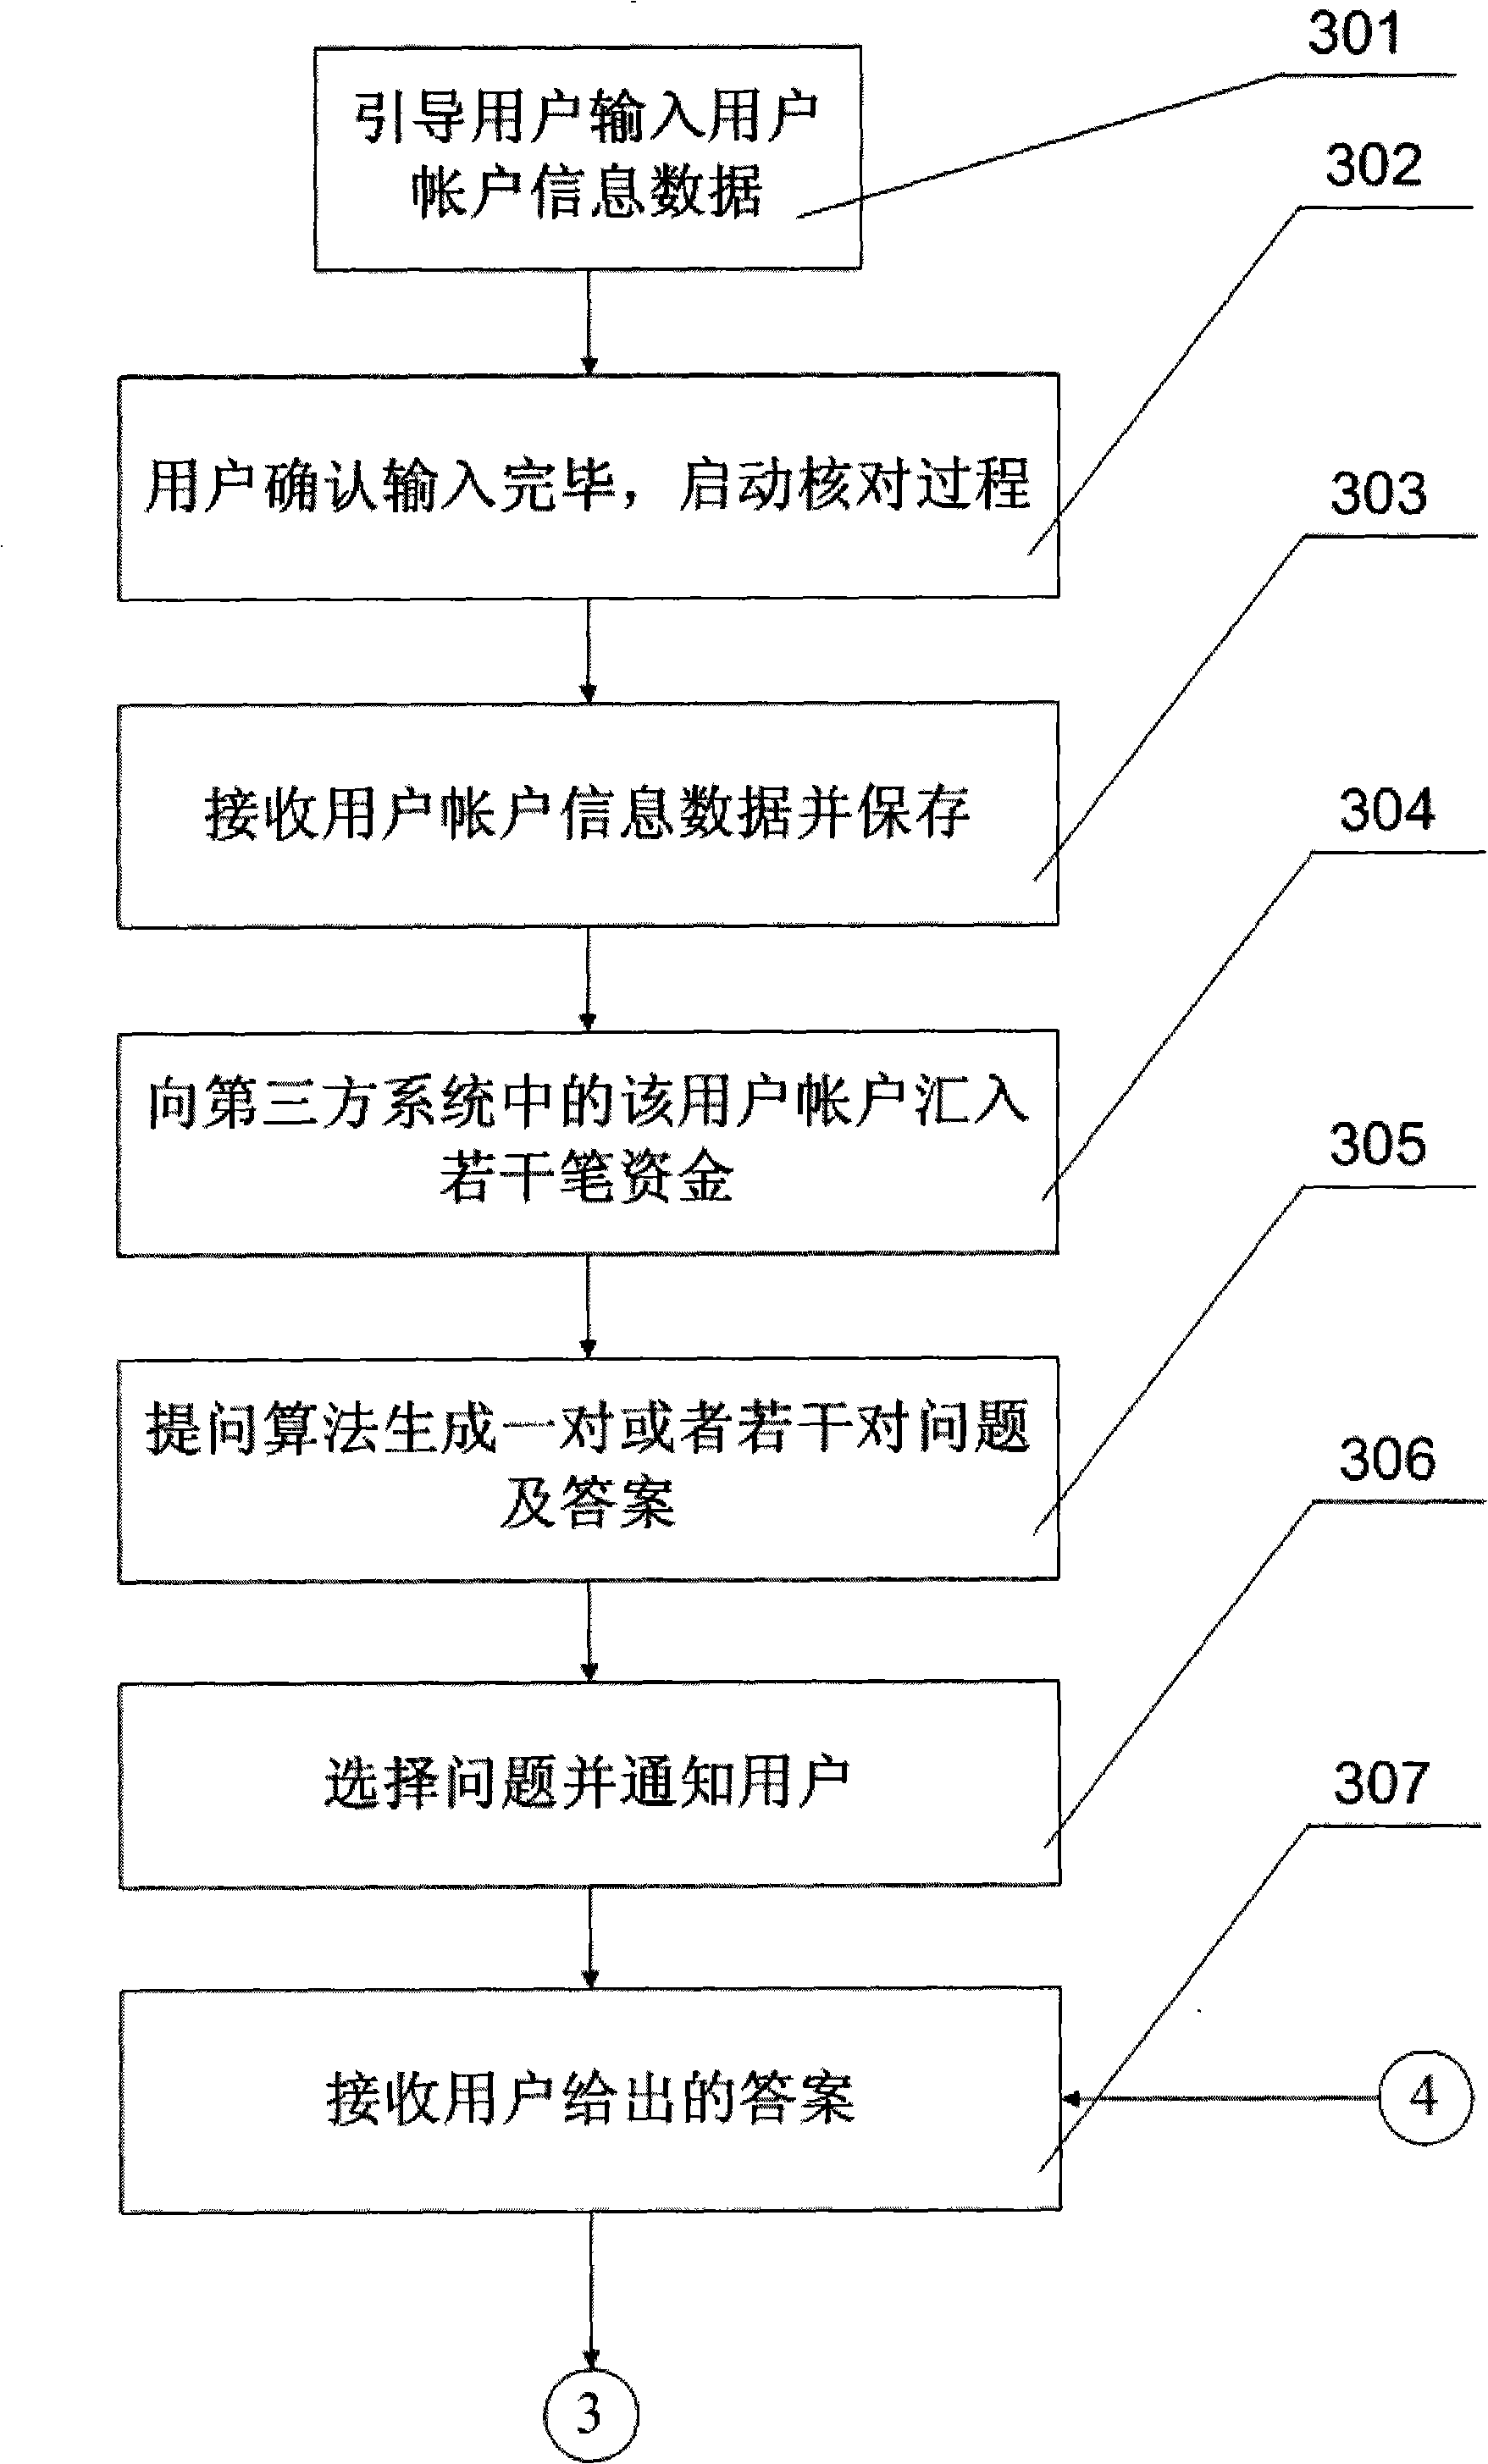 Method and system for user information check